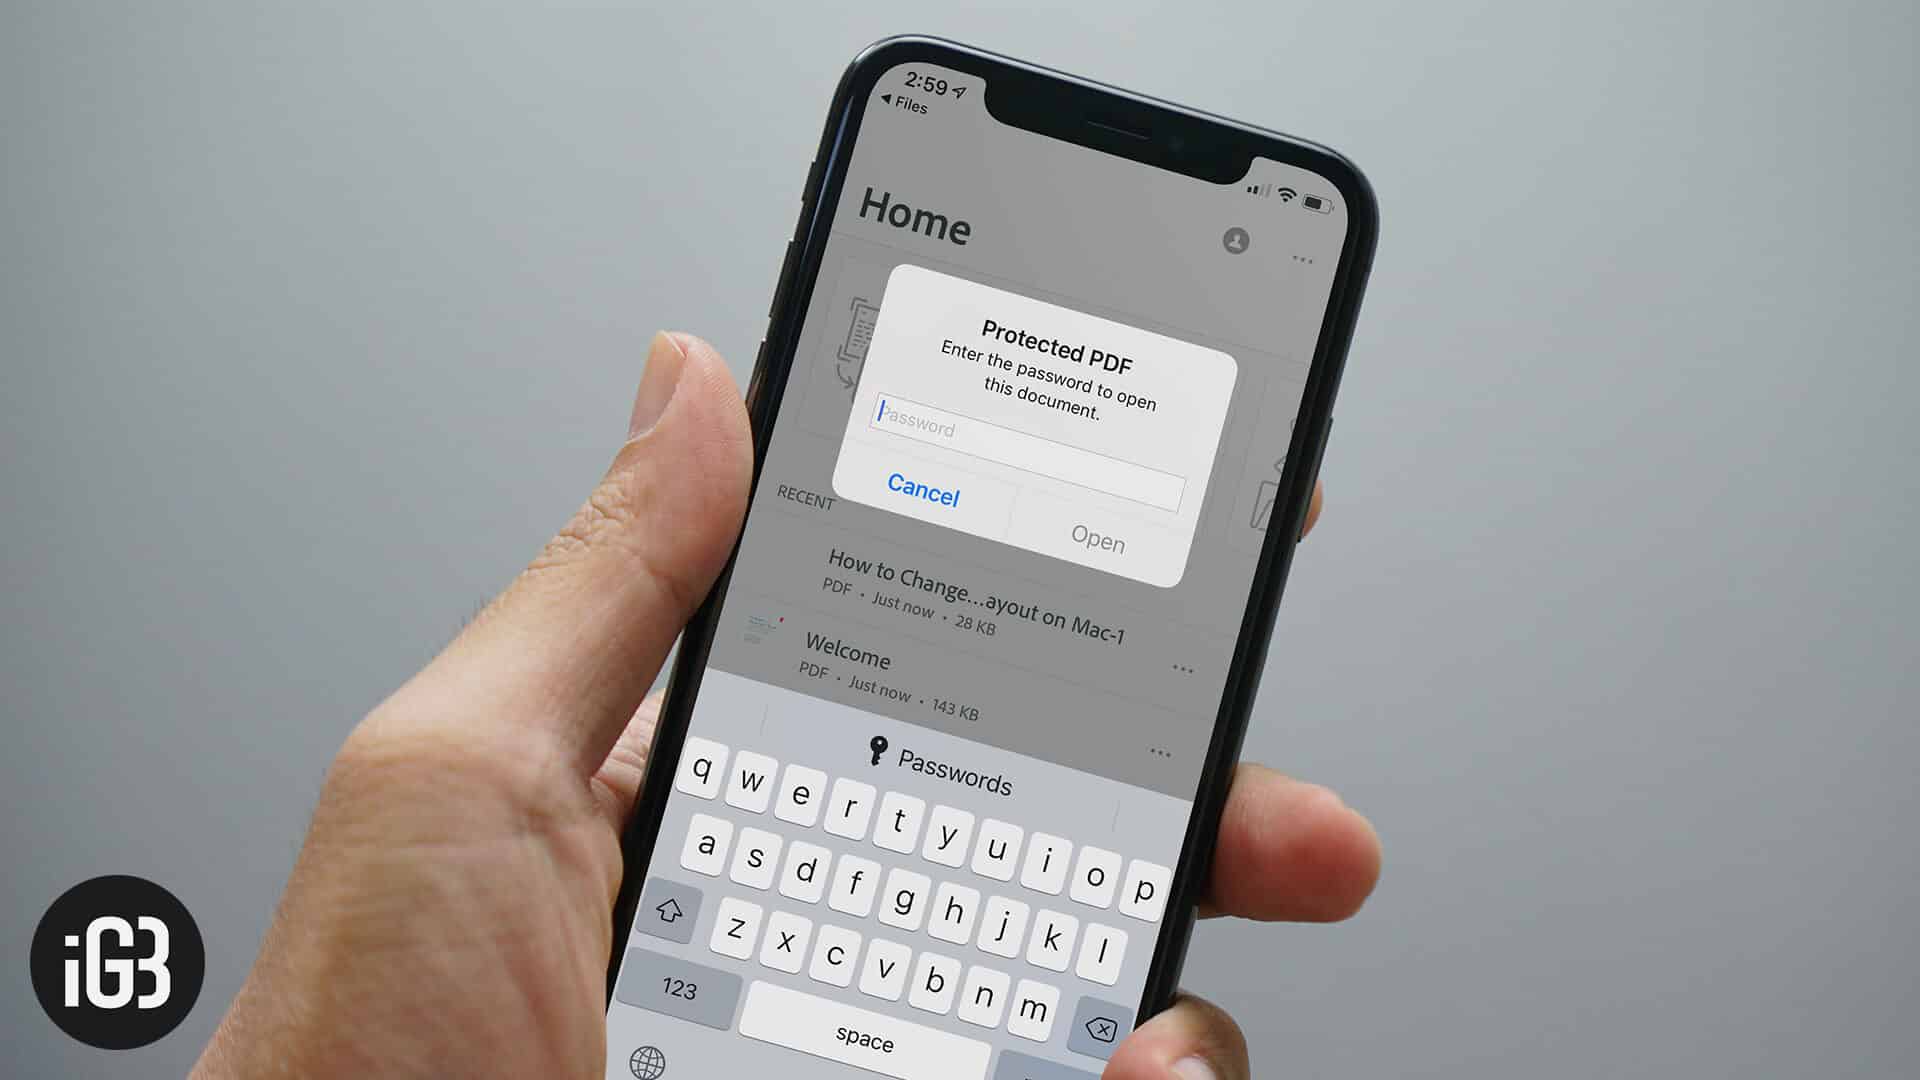 How to password protect a pdf file on iphone and ipad